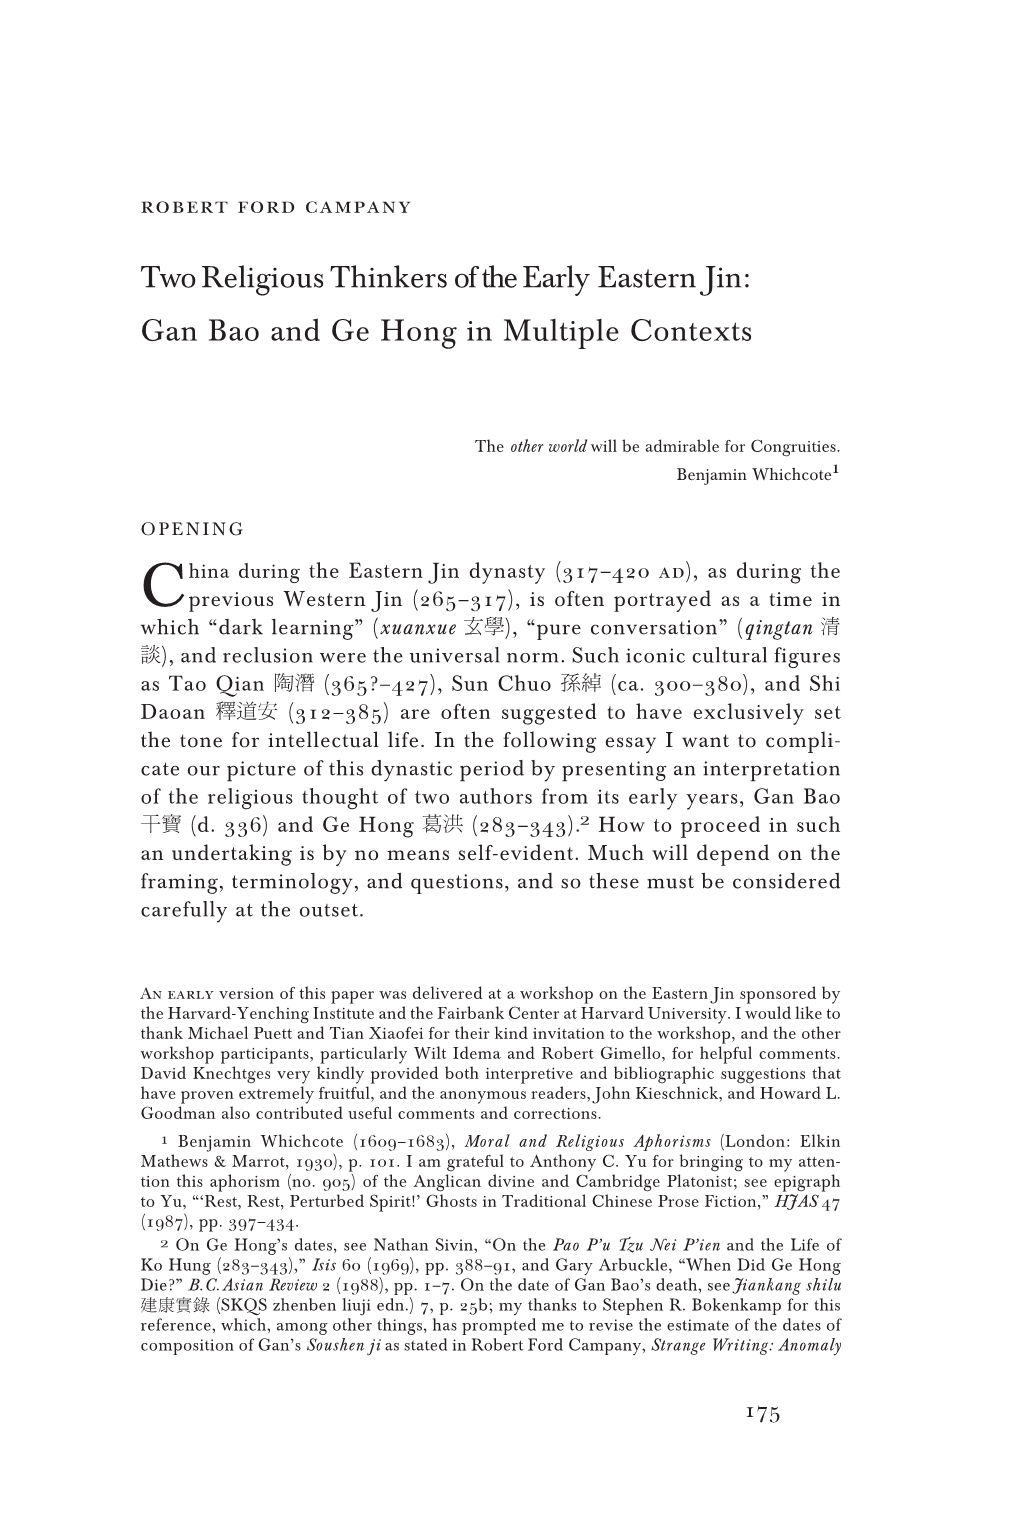 Two Religious Thinkers of the Early Eastern Jin: Gan Bao and Ge Hong in Multiple Contexts